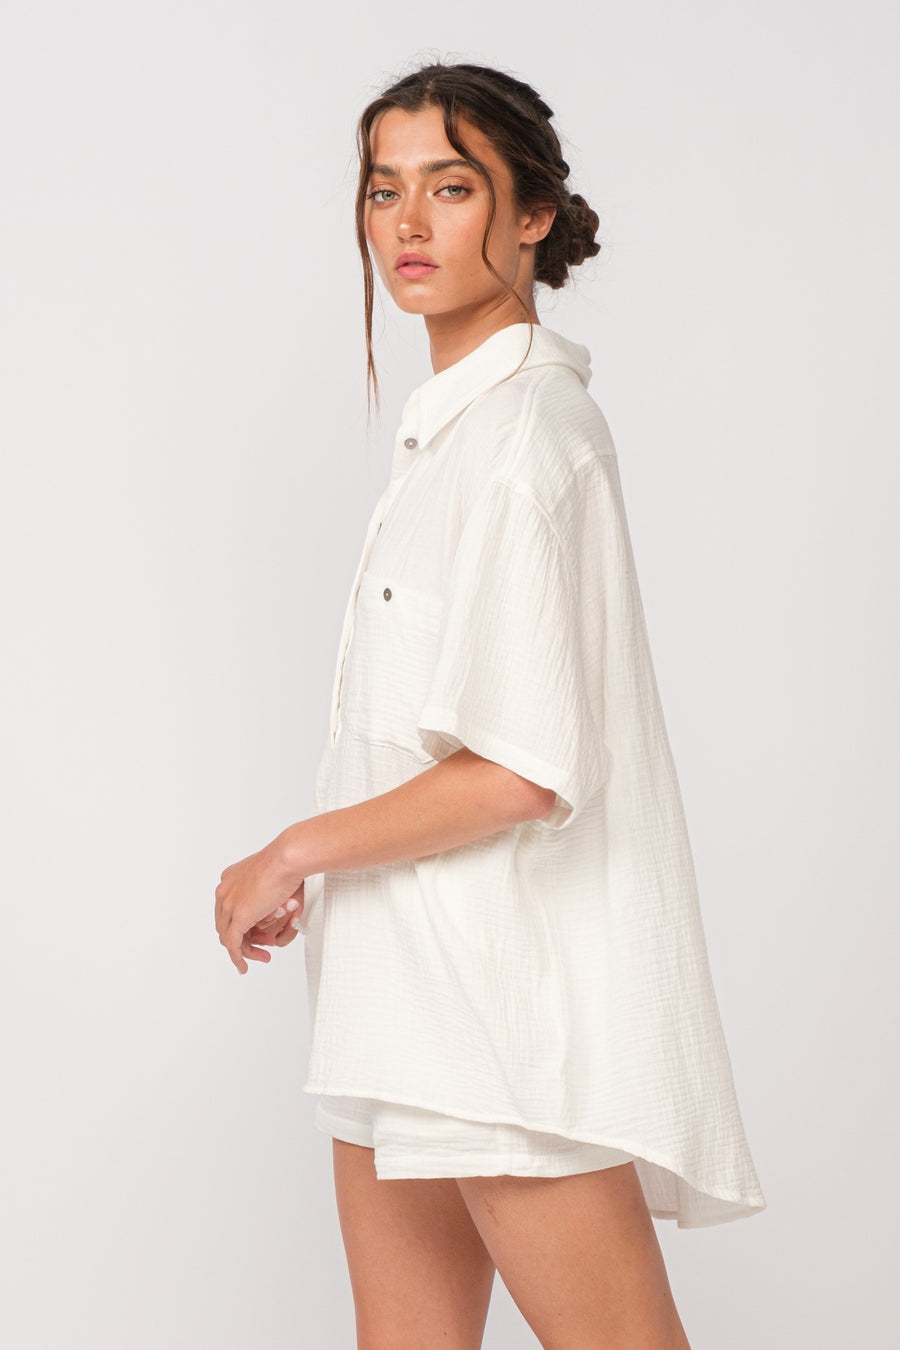 White short sleeve shirt with collar.,